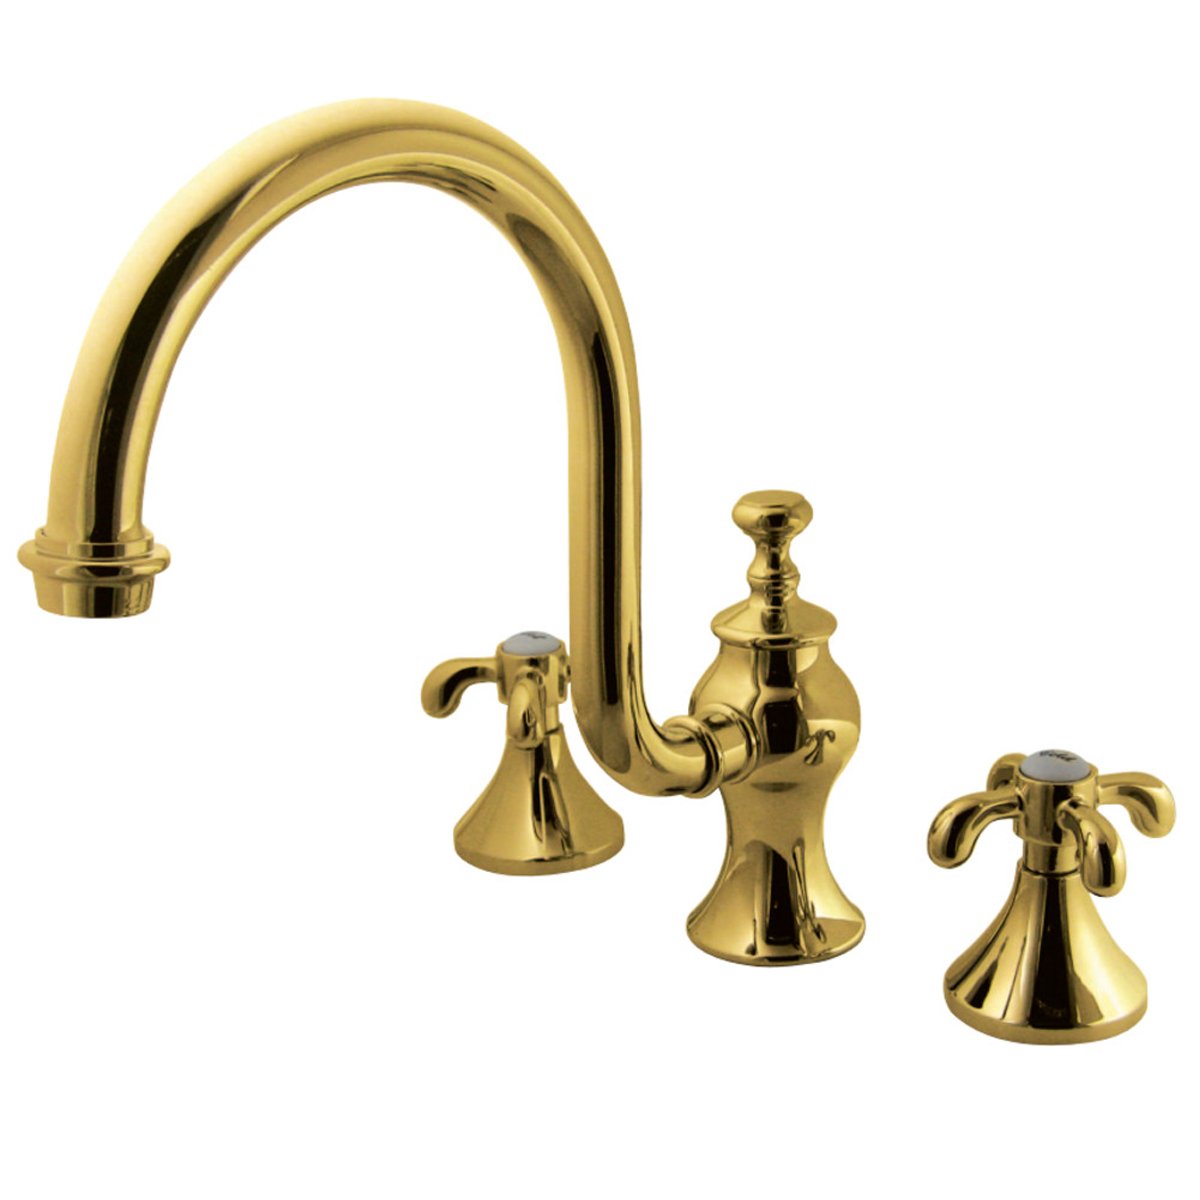 Kingston Brass French Country Roman Tub Filler with High Rise Spout